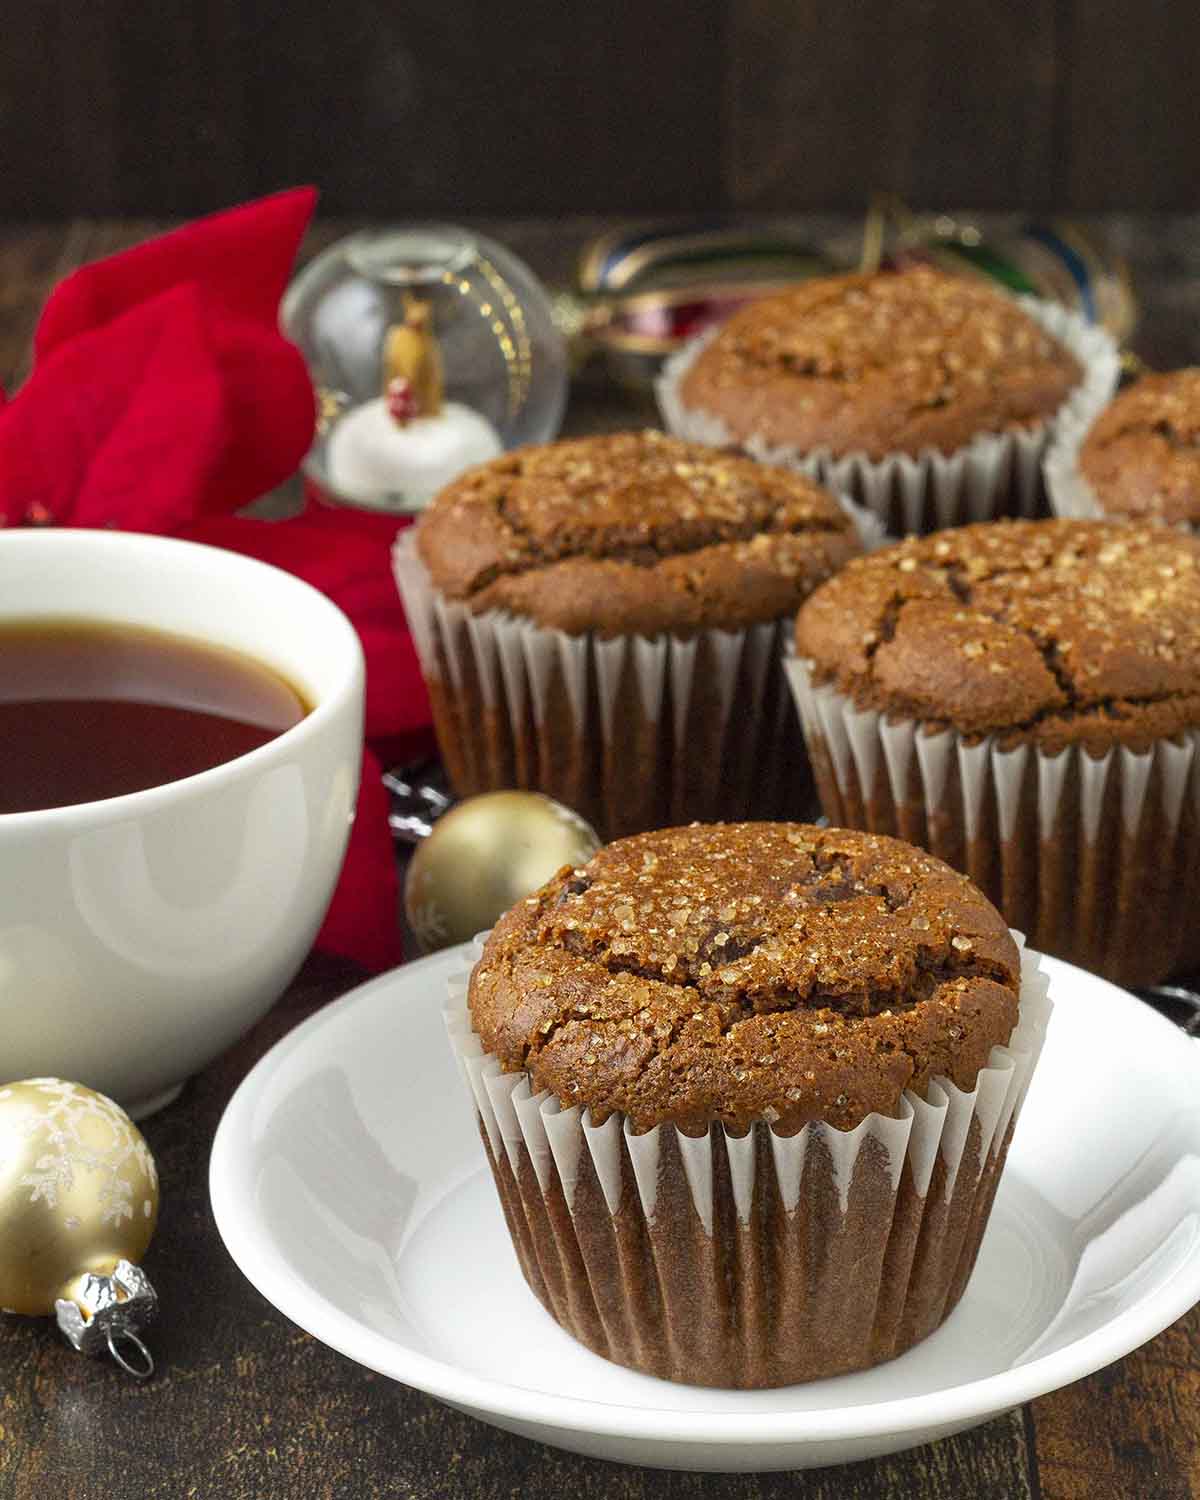 A vegan gluten-free gingerbread muffin on a small white plate.